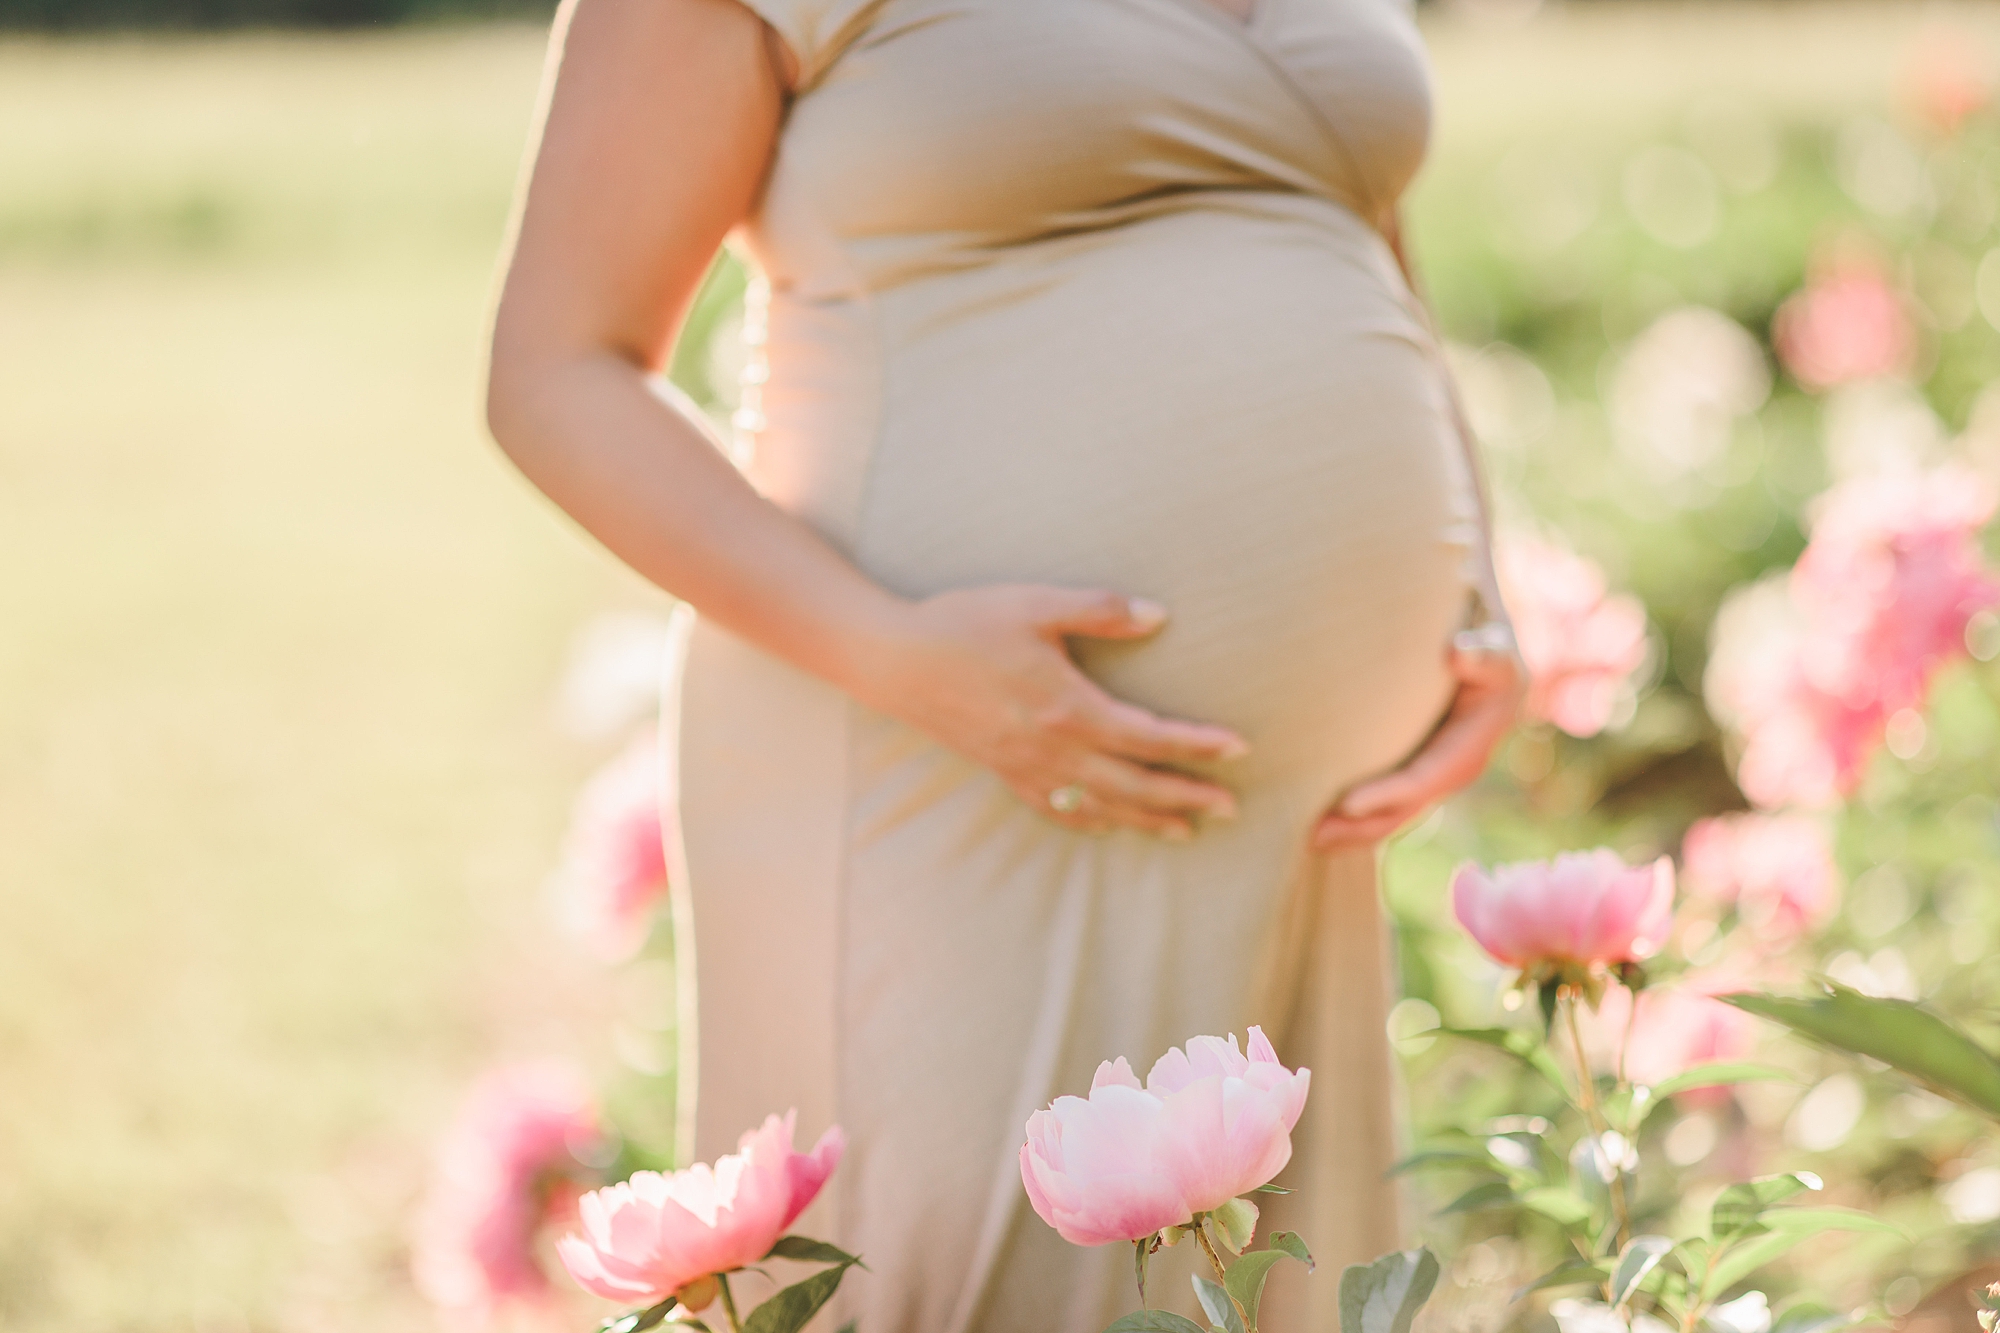 woman holds baby bump in tan dress standing among pink peonies 